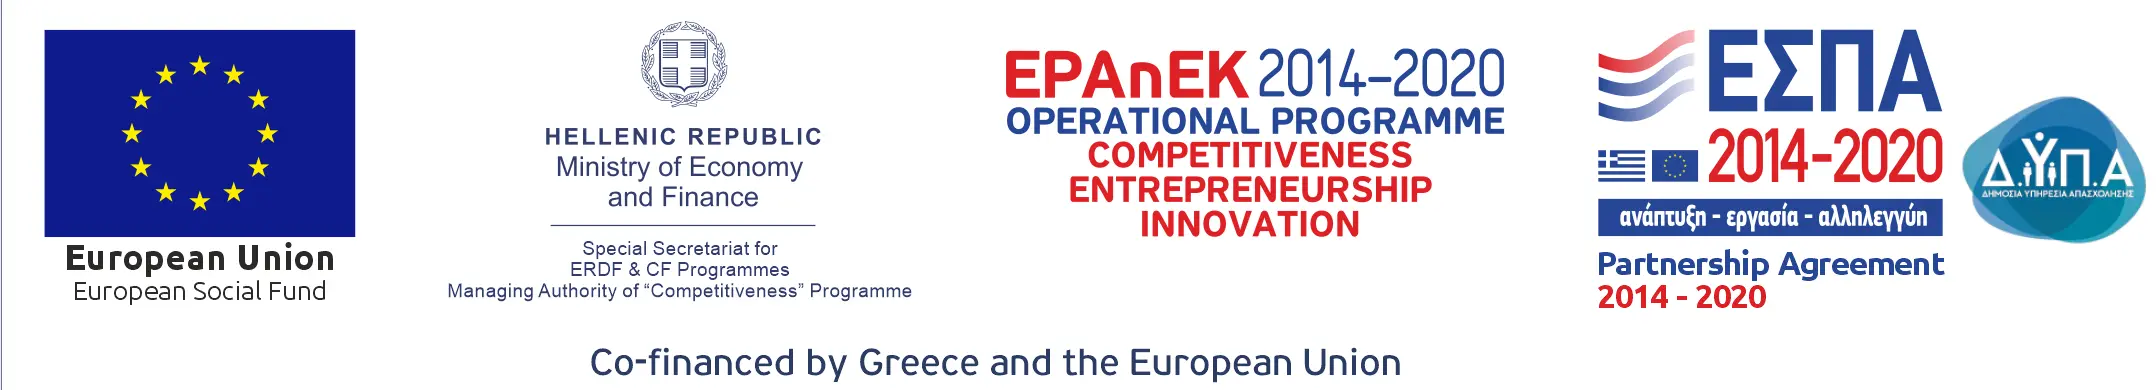 Competitiveness Entrepreneurship Innovation - Co-financed by Greece and the European Union